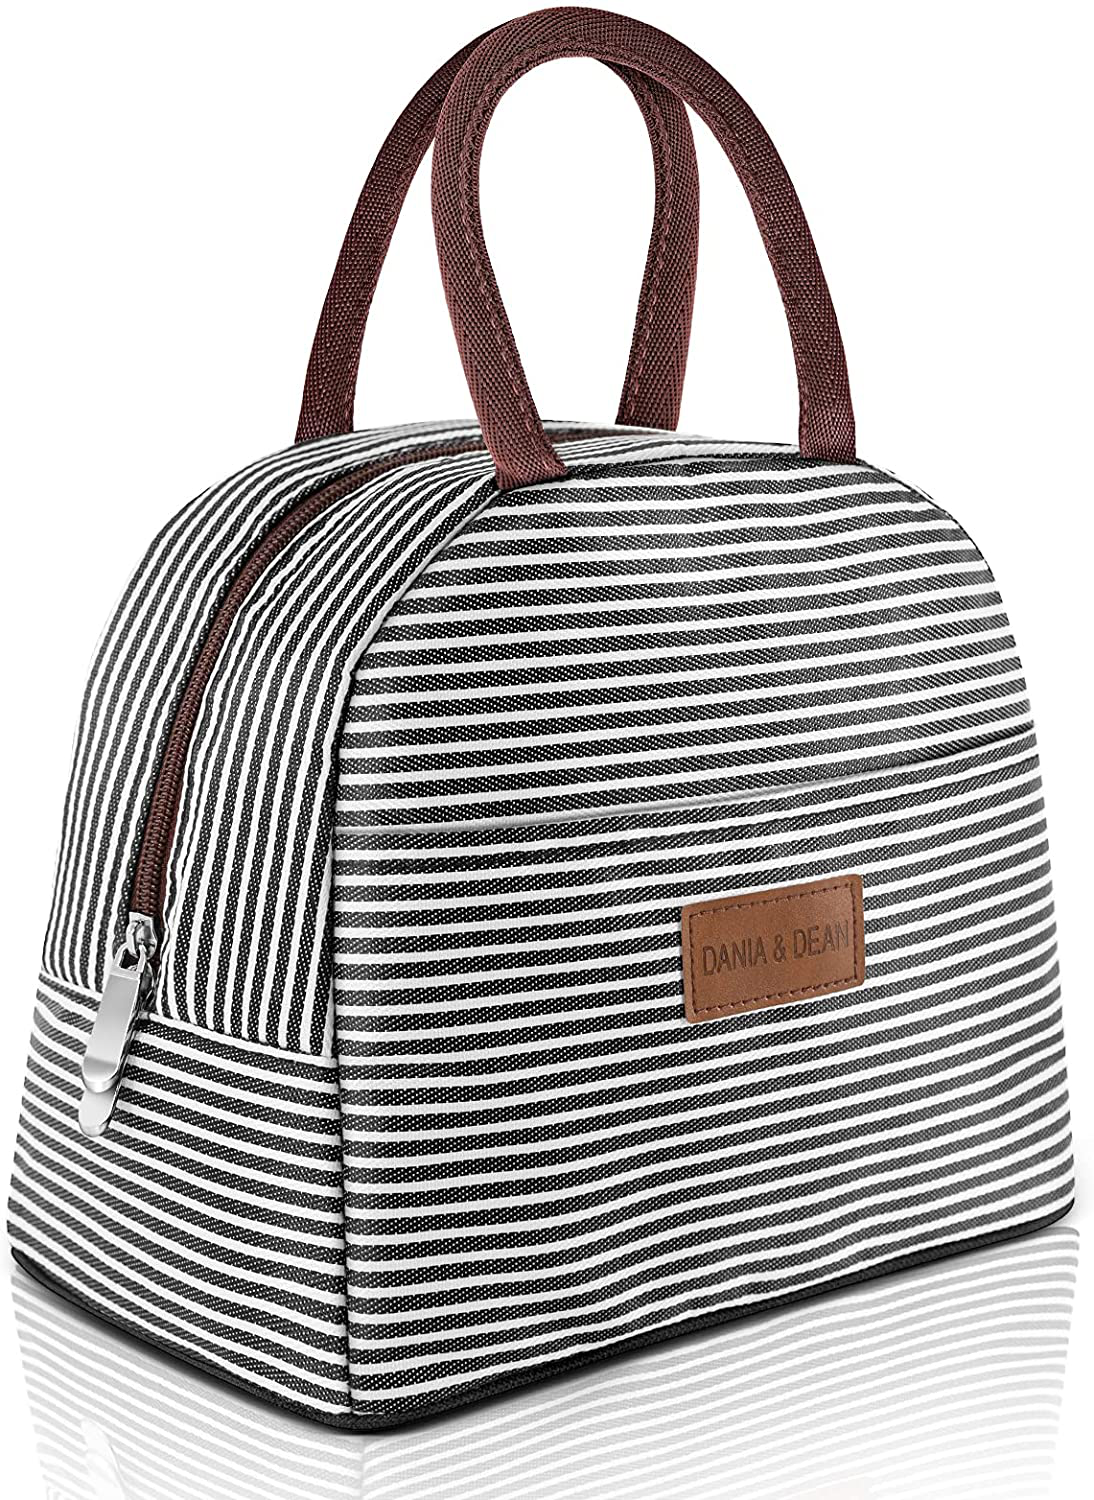 DANIA & DEAN Durable Insulated Lunch Bag for Women/Kids Double Zippers Wide Open Tote Bag Leakproof Thermal and Cooler Reusable Lunch Box for Office/School/Outdoor (Black and White Stripes)